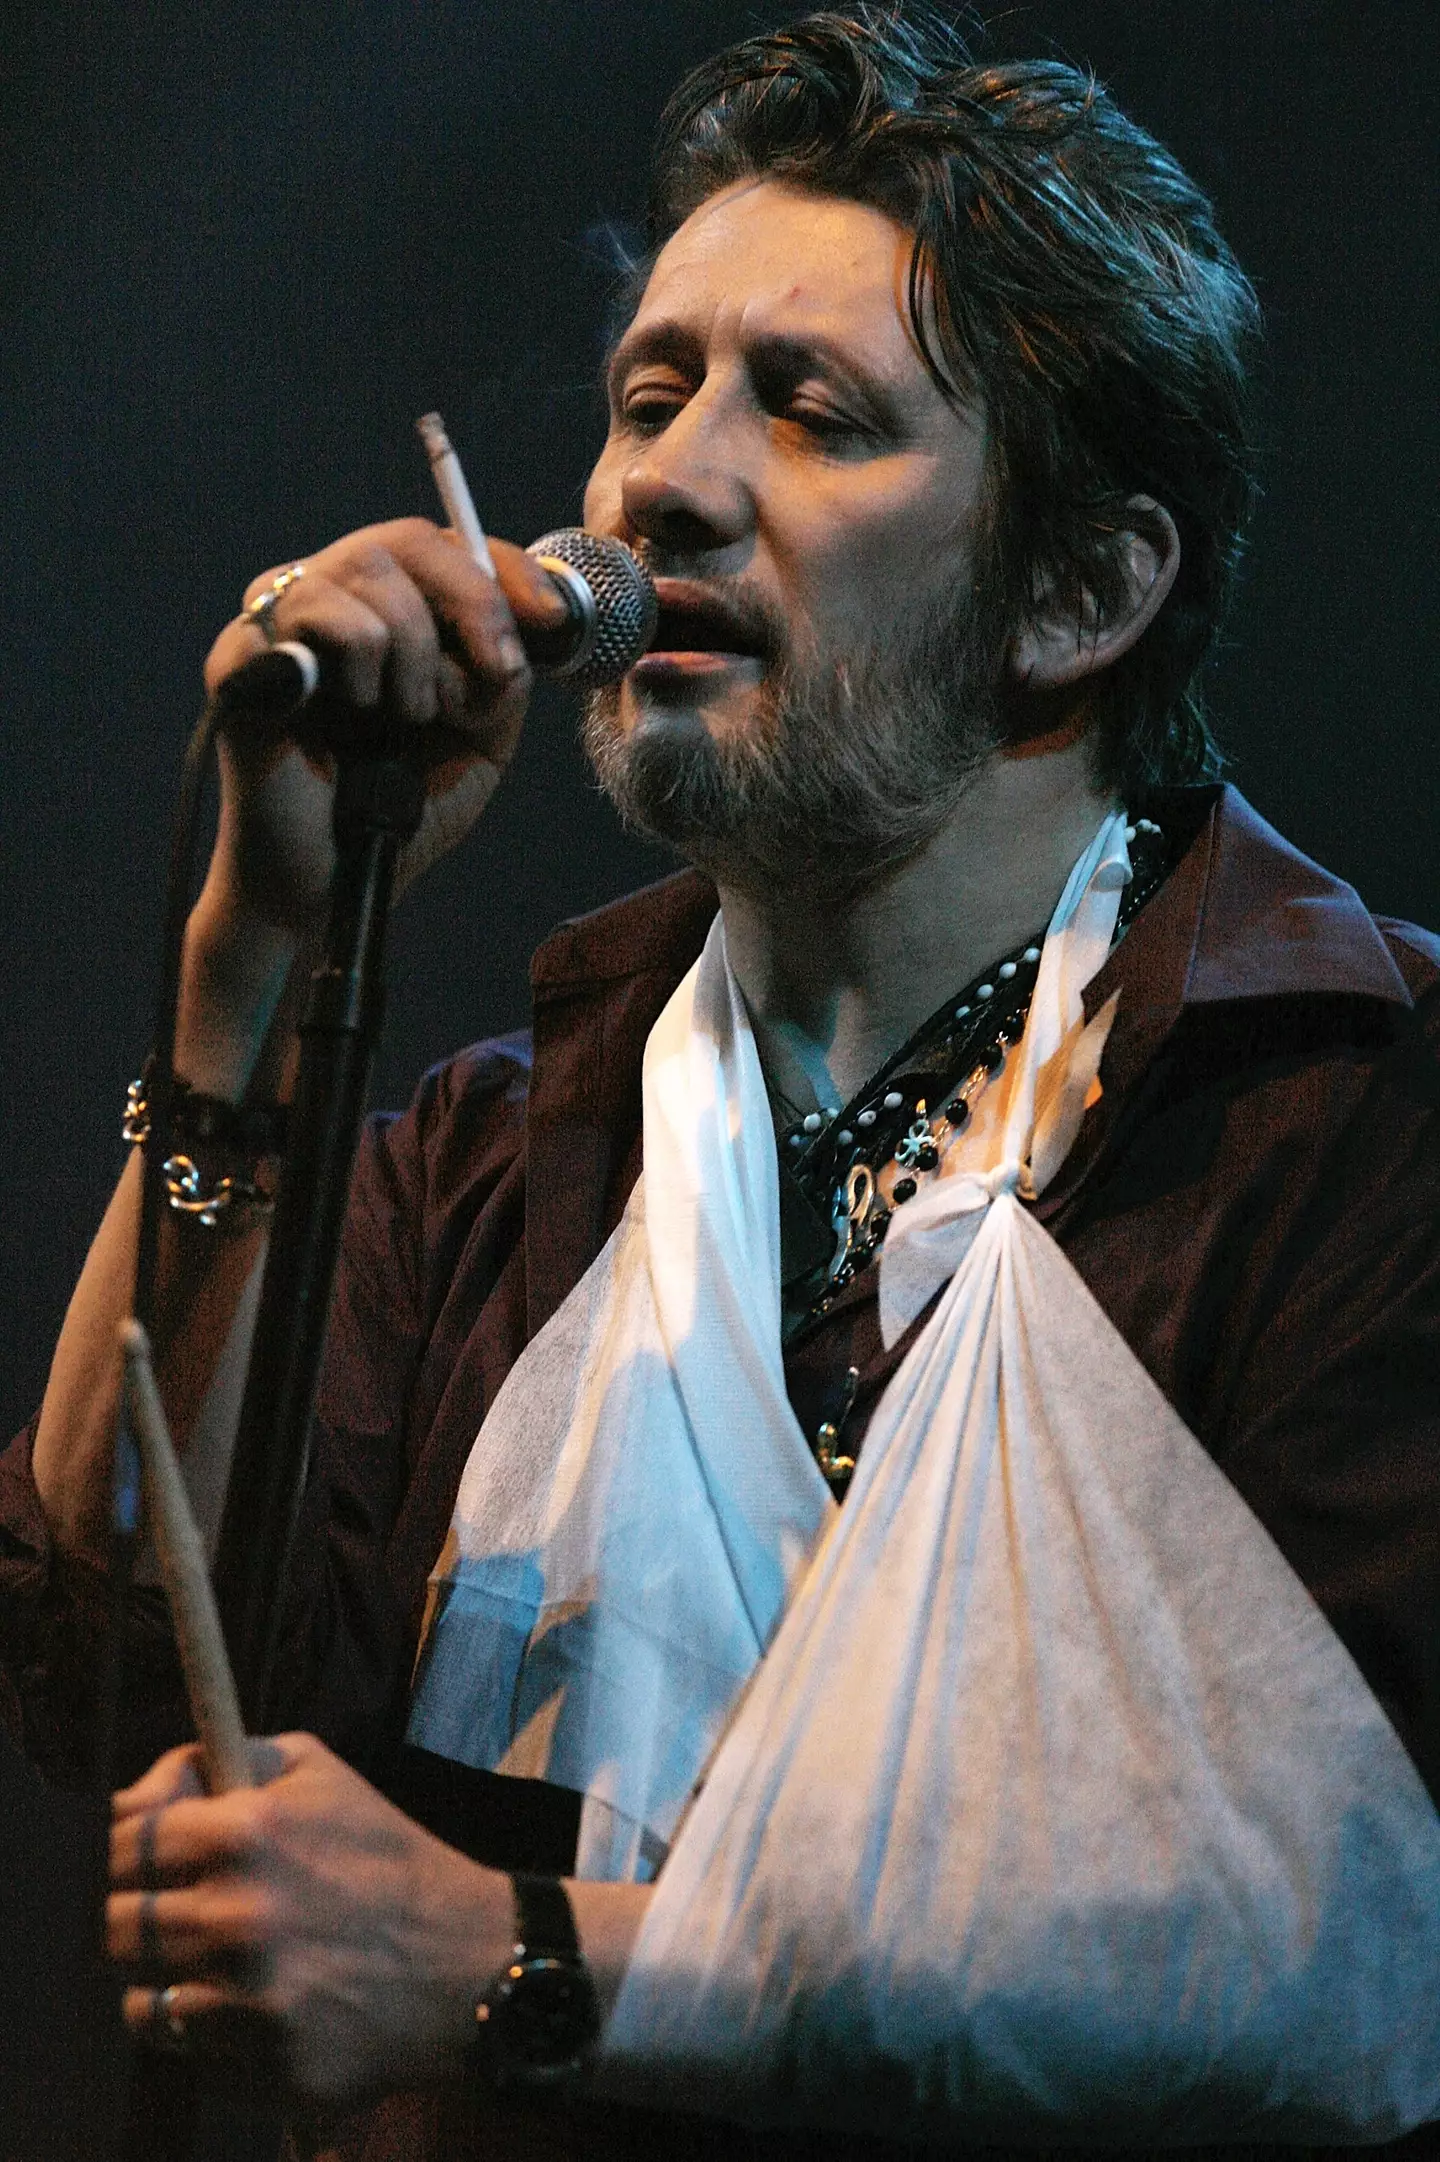 Shane MacGowan's lyric has been swapped out in recent years.